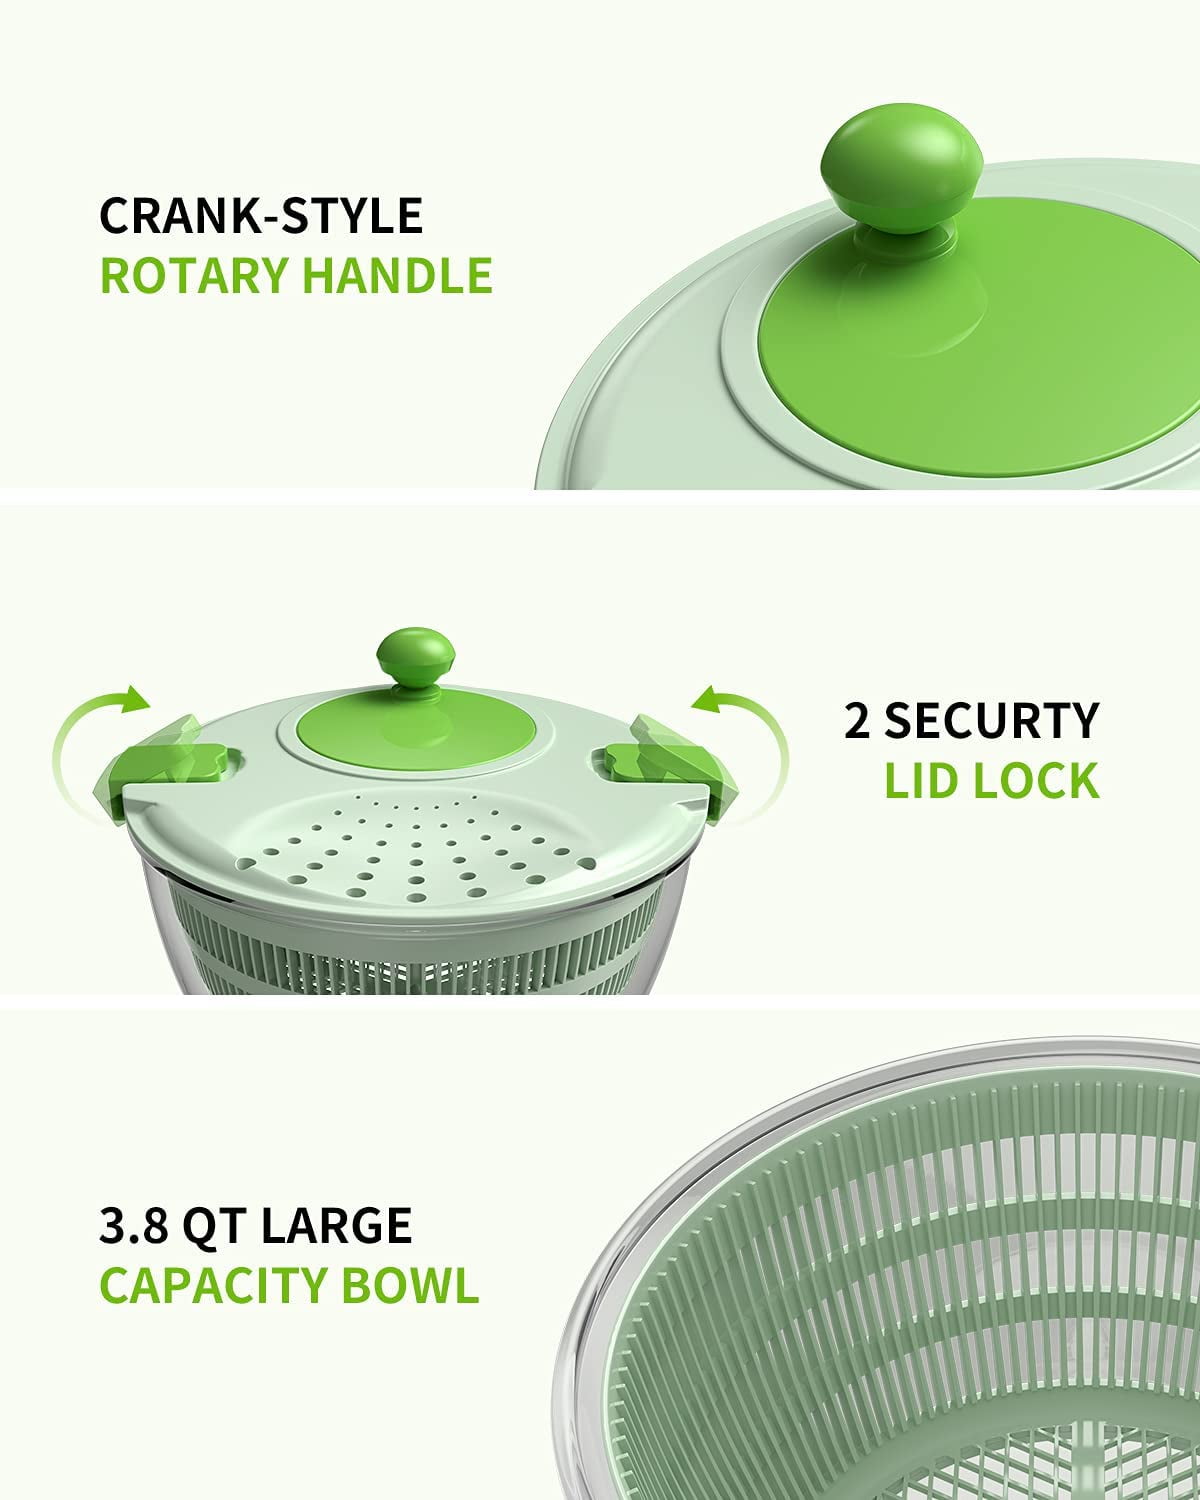 GCP Products Salad Spinner Lettuce Dryer, Durable Rotary Veggie Washer With  Compact Bowl And Colander, Easy To Clean, Wash, Dry Vegetables…